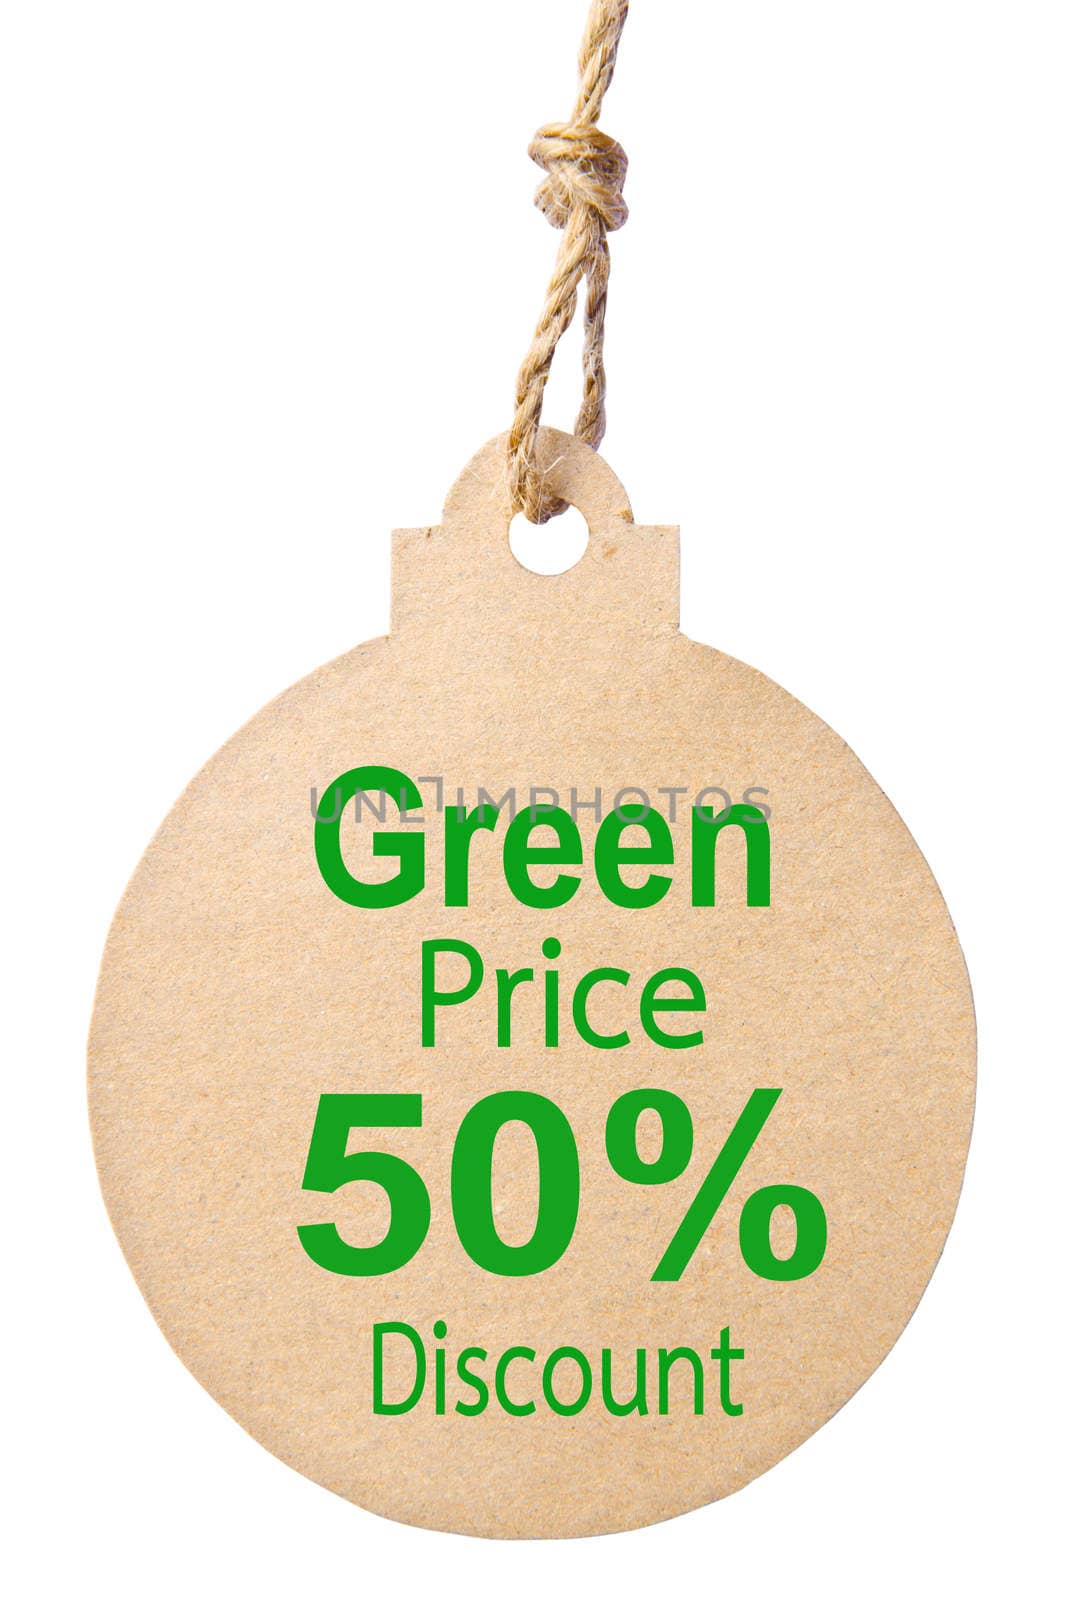 Eco friendly tag, Green price 50% Discount. Clipping path